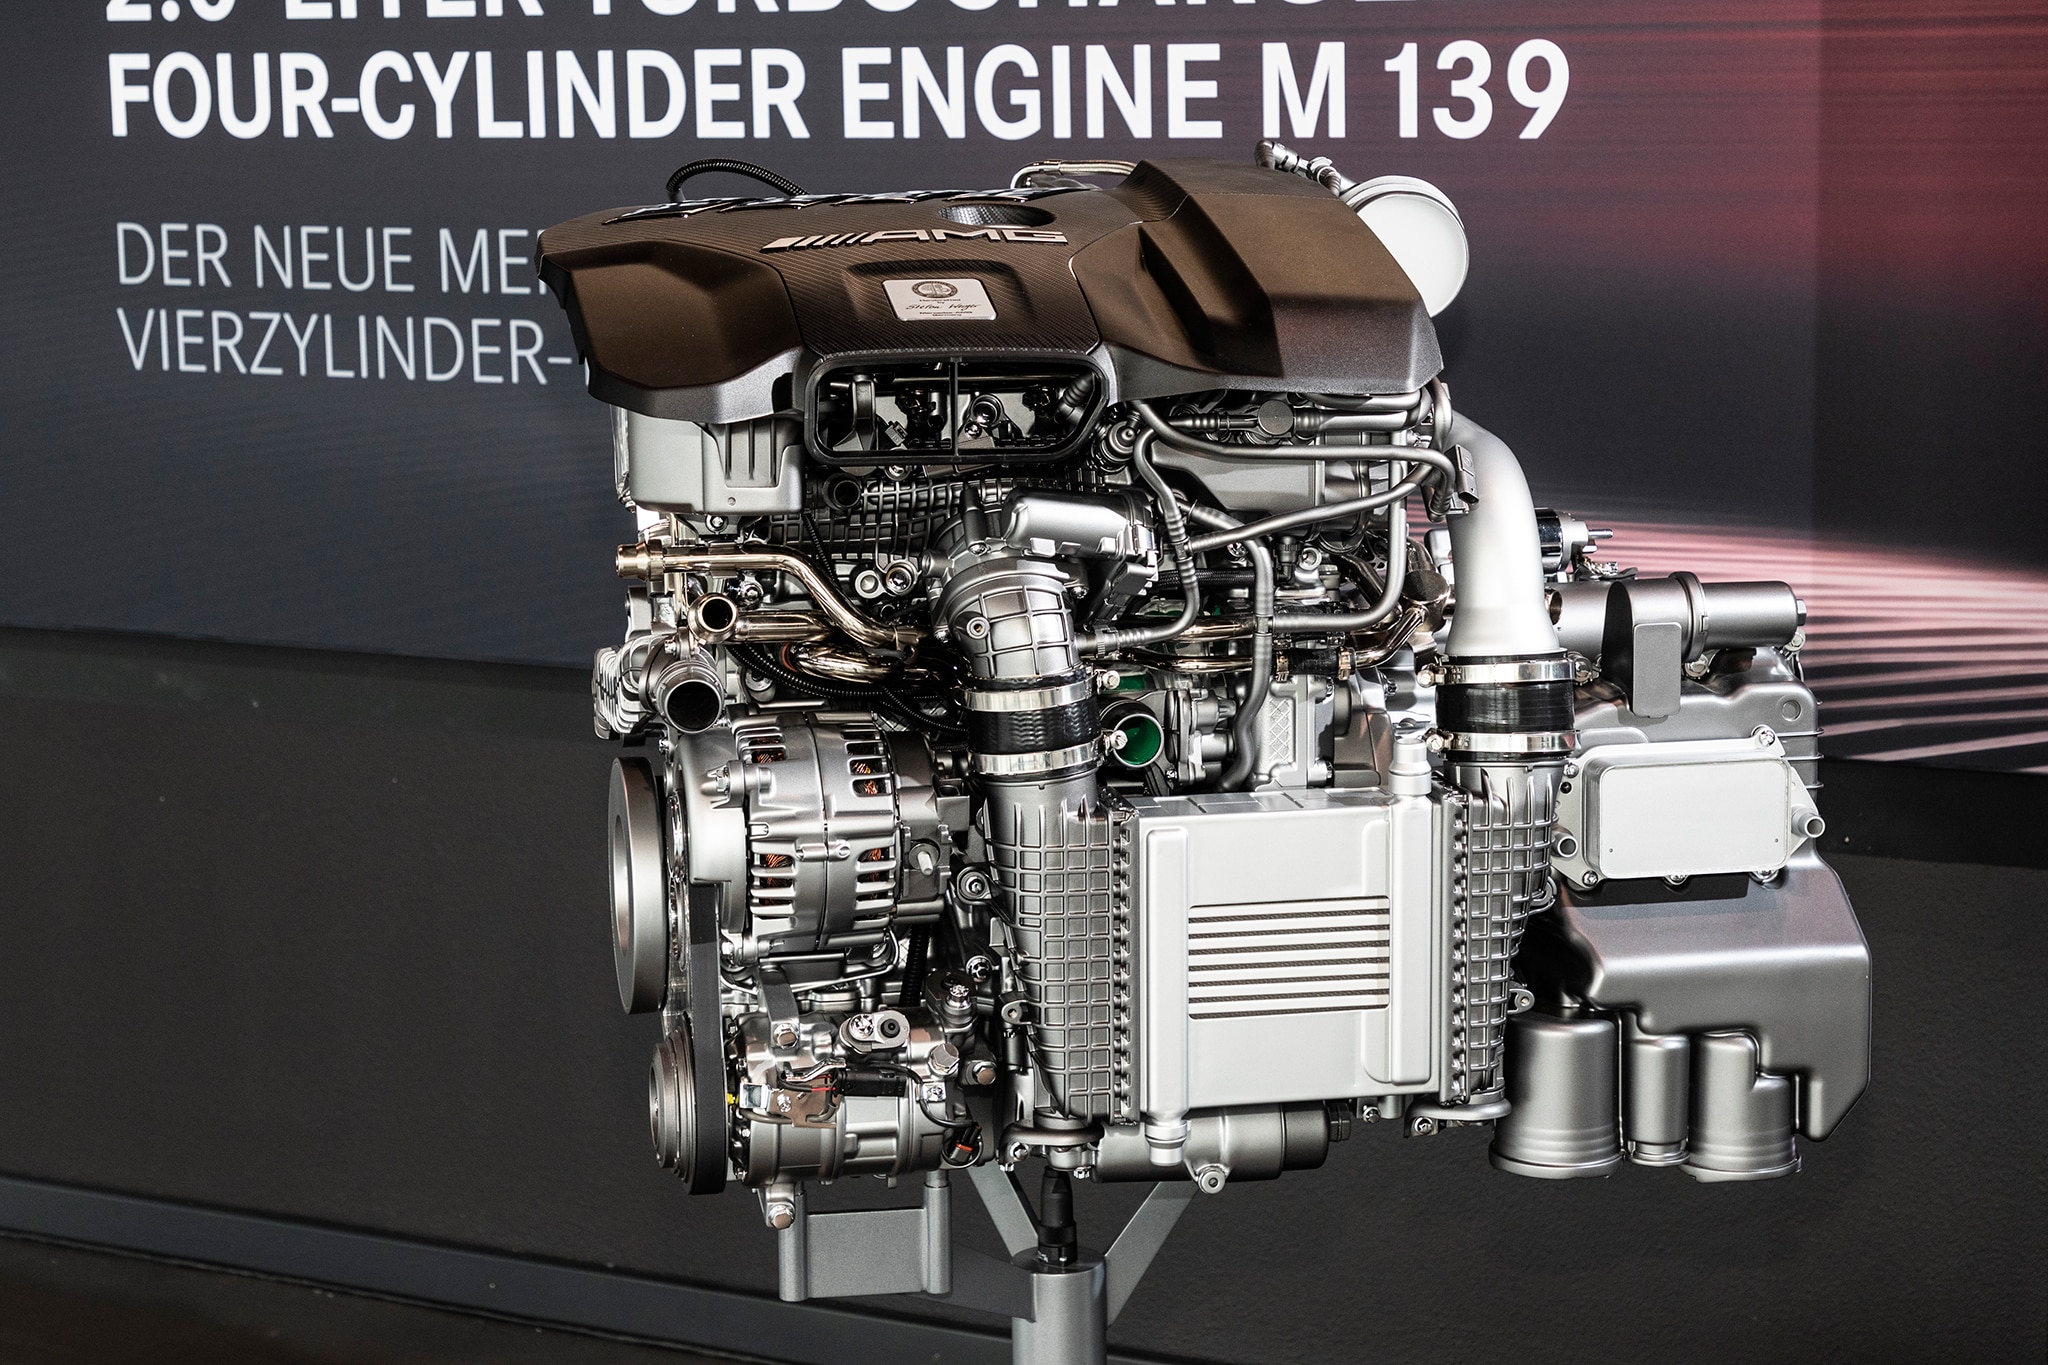 The Most Powerful 4-Cylinder Engine In The World By Mercedes